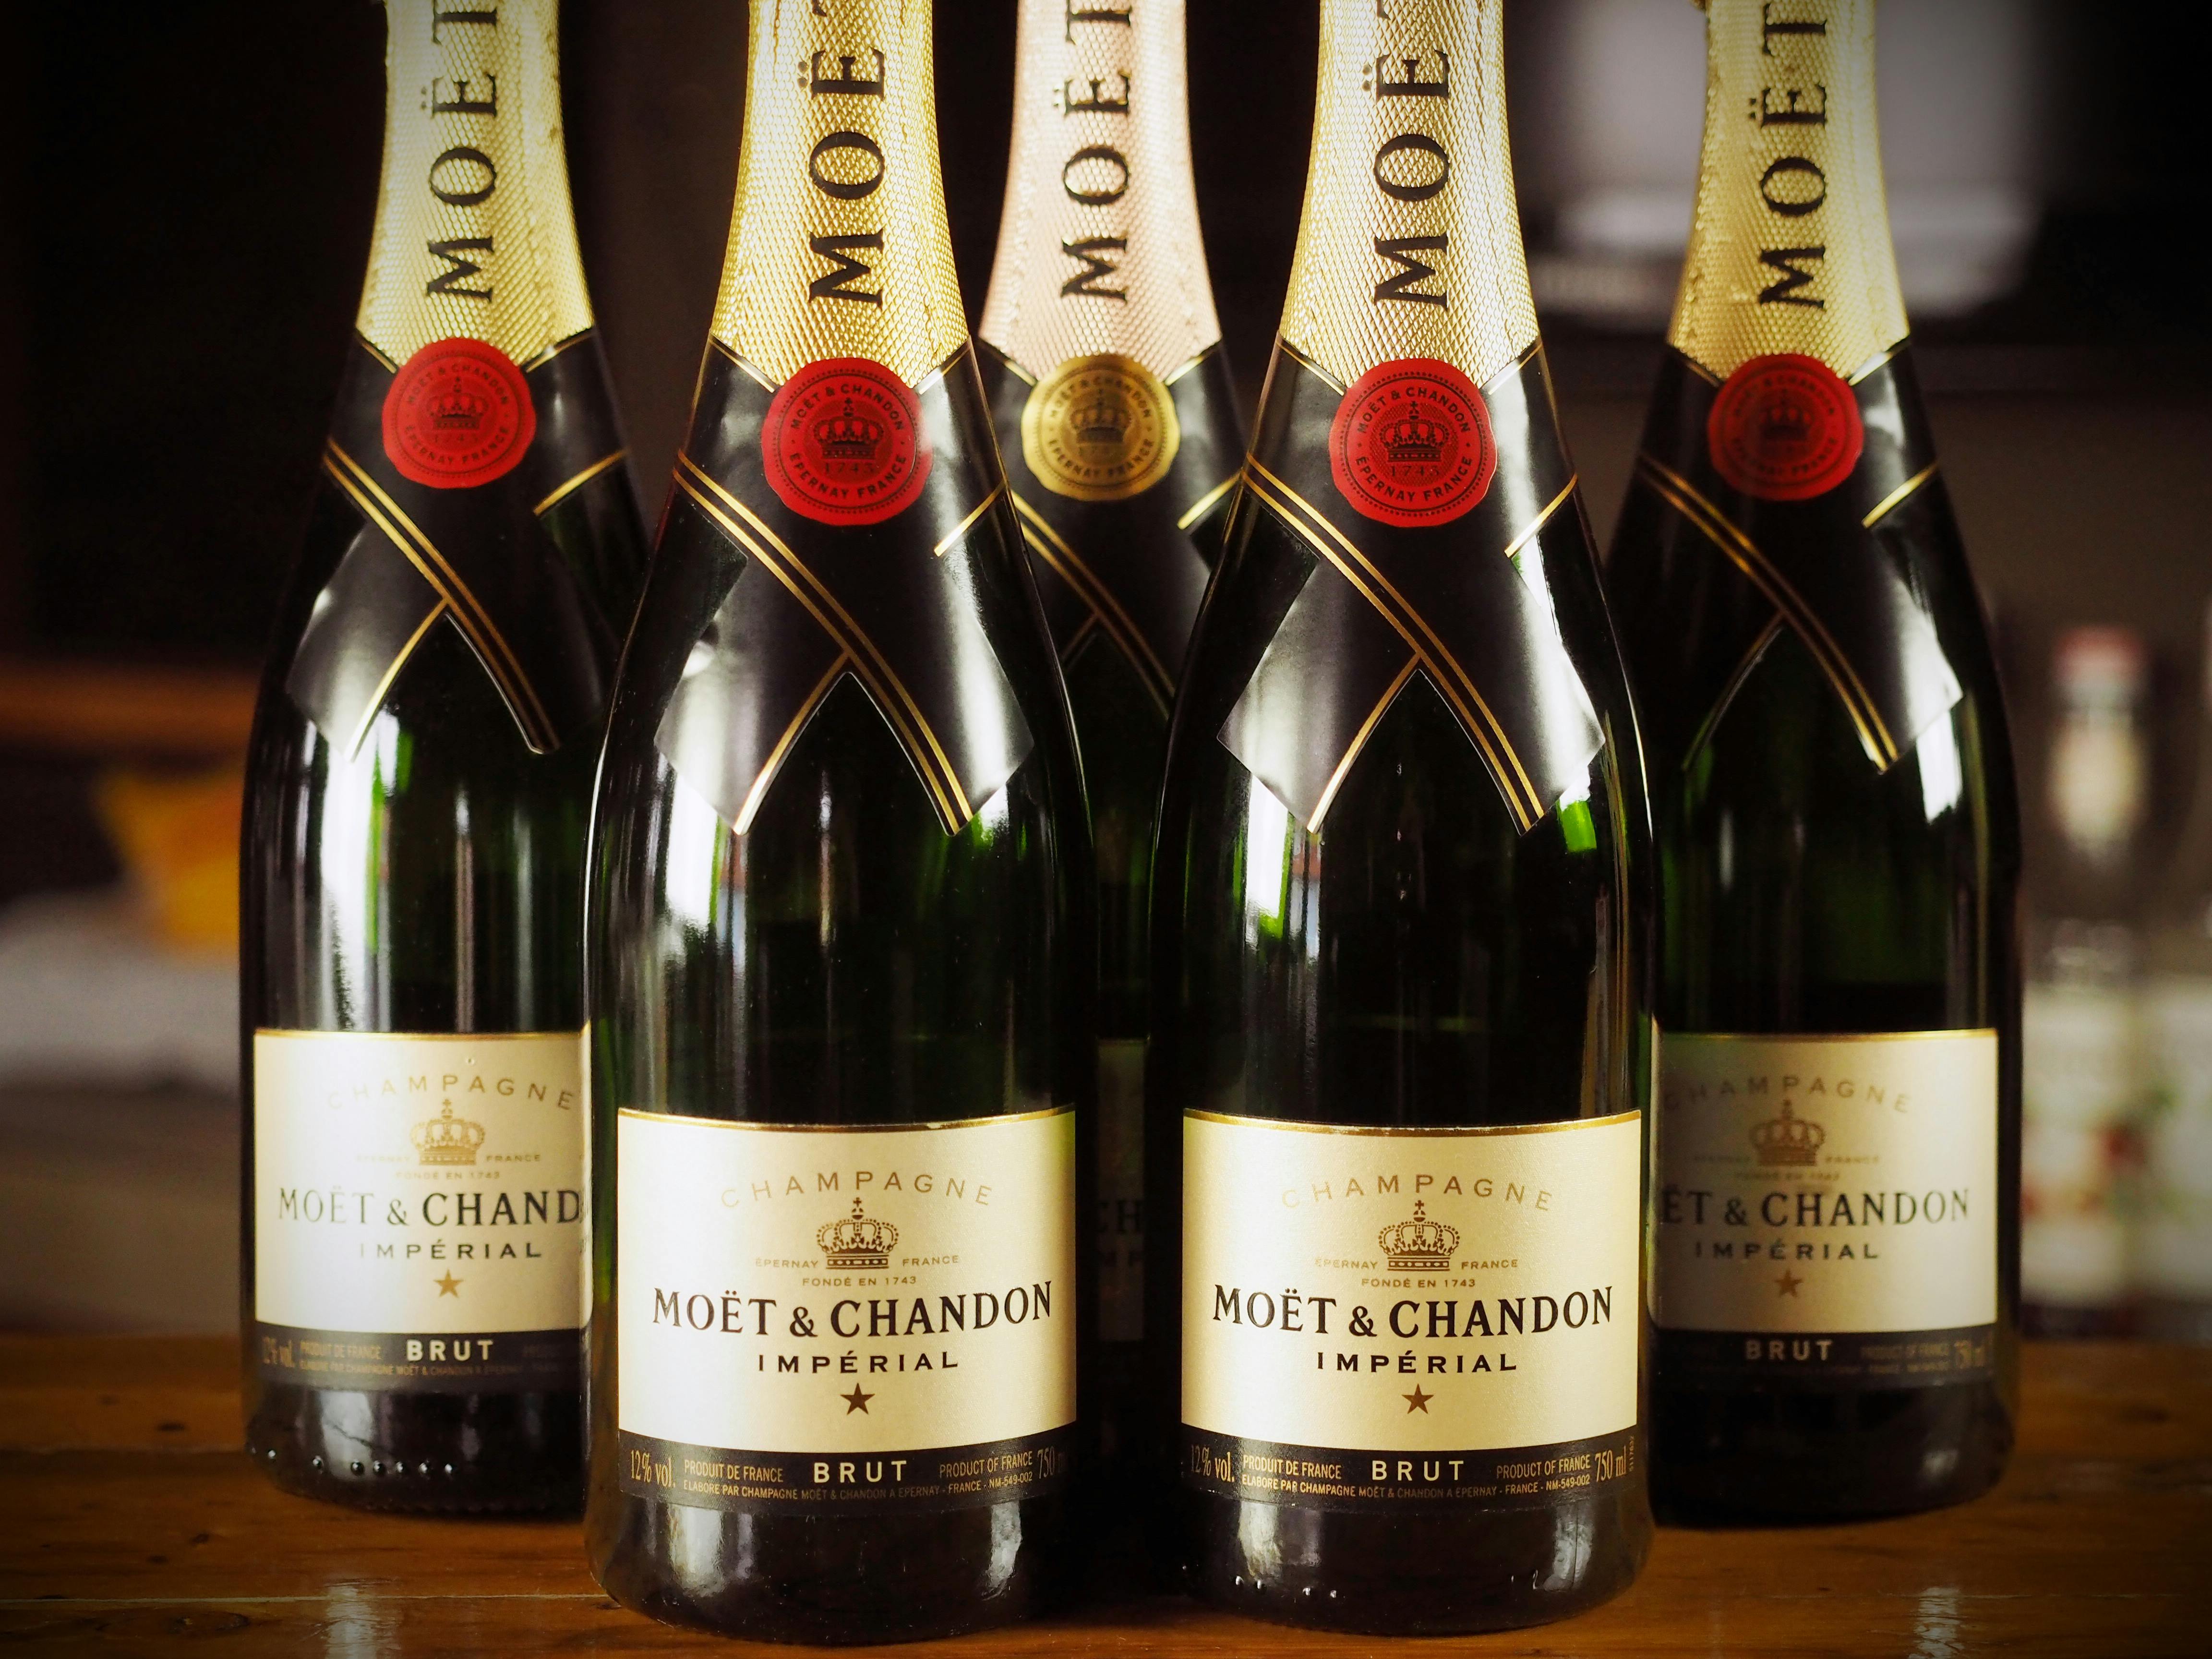 Champagne Moet Chandon Stock Photo - Download Image Now